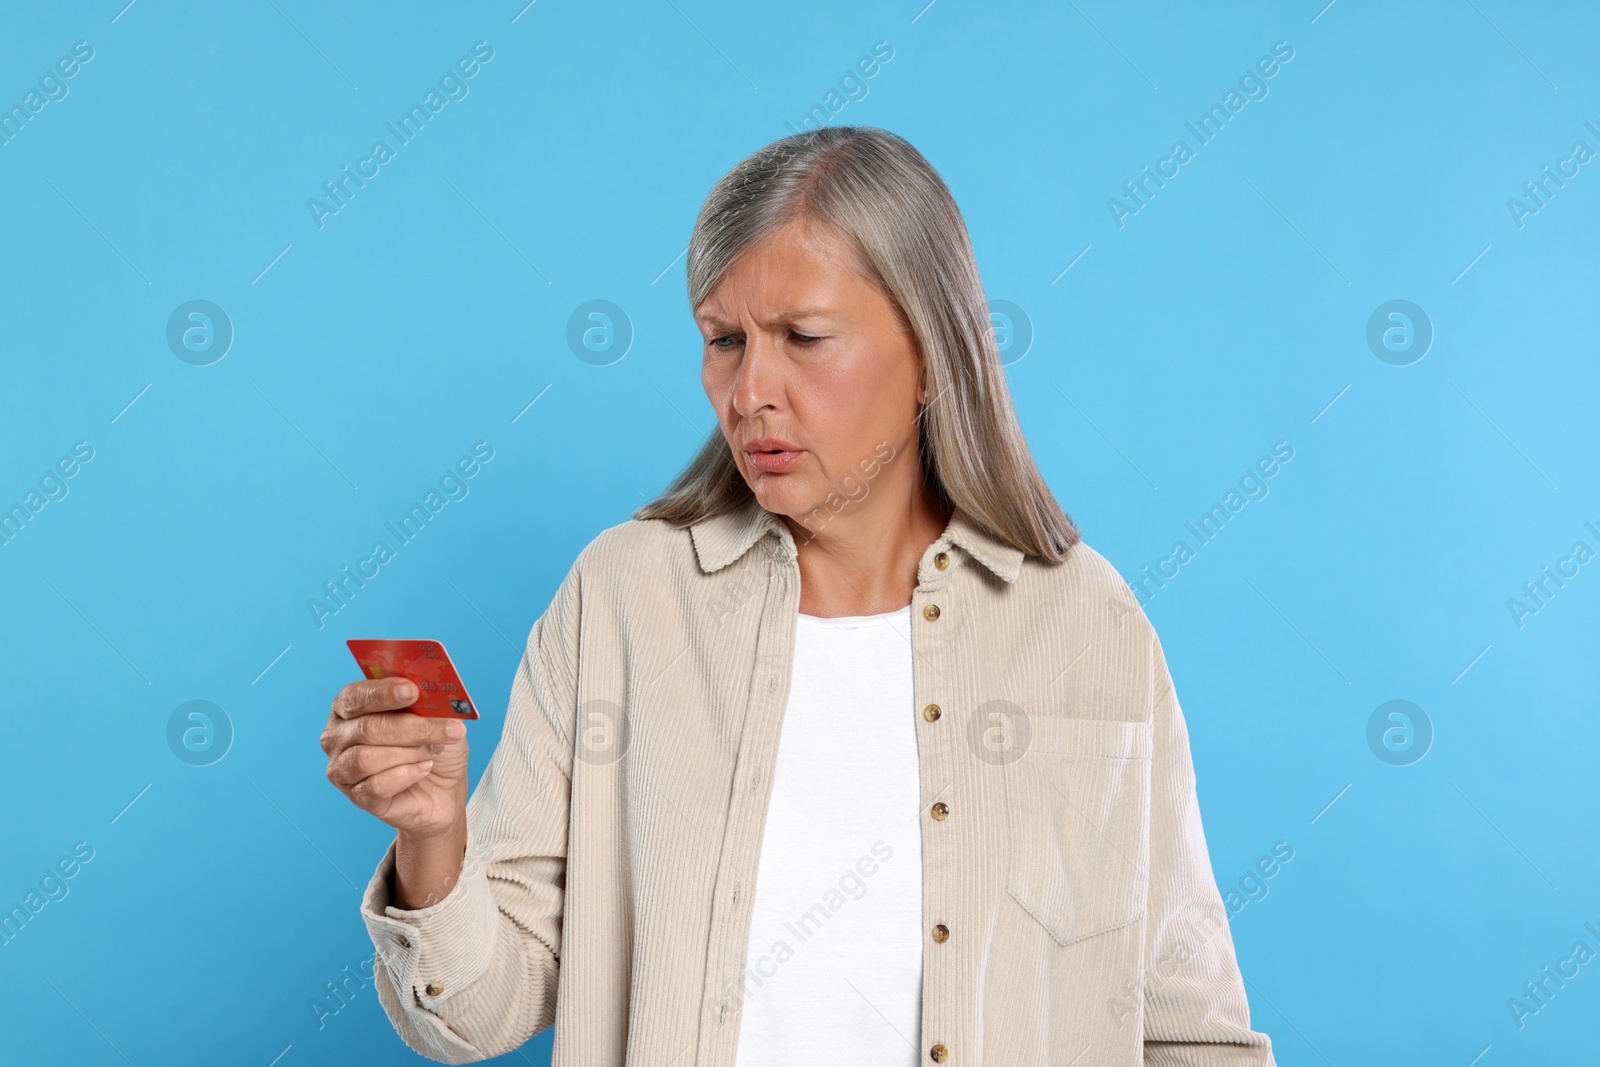 Photo of Worried woman with credit card on light blue background. Be careful - fraud